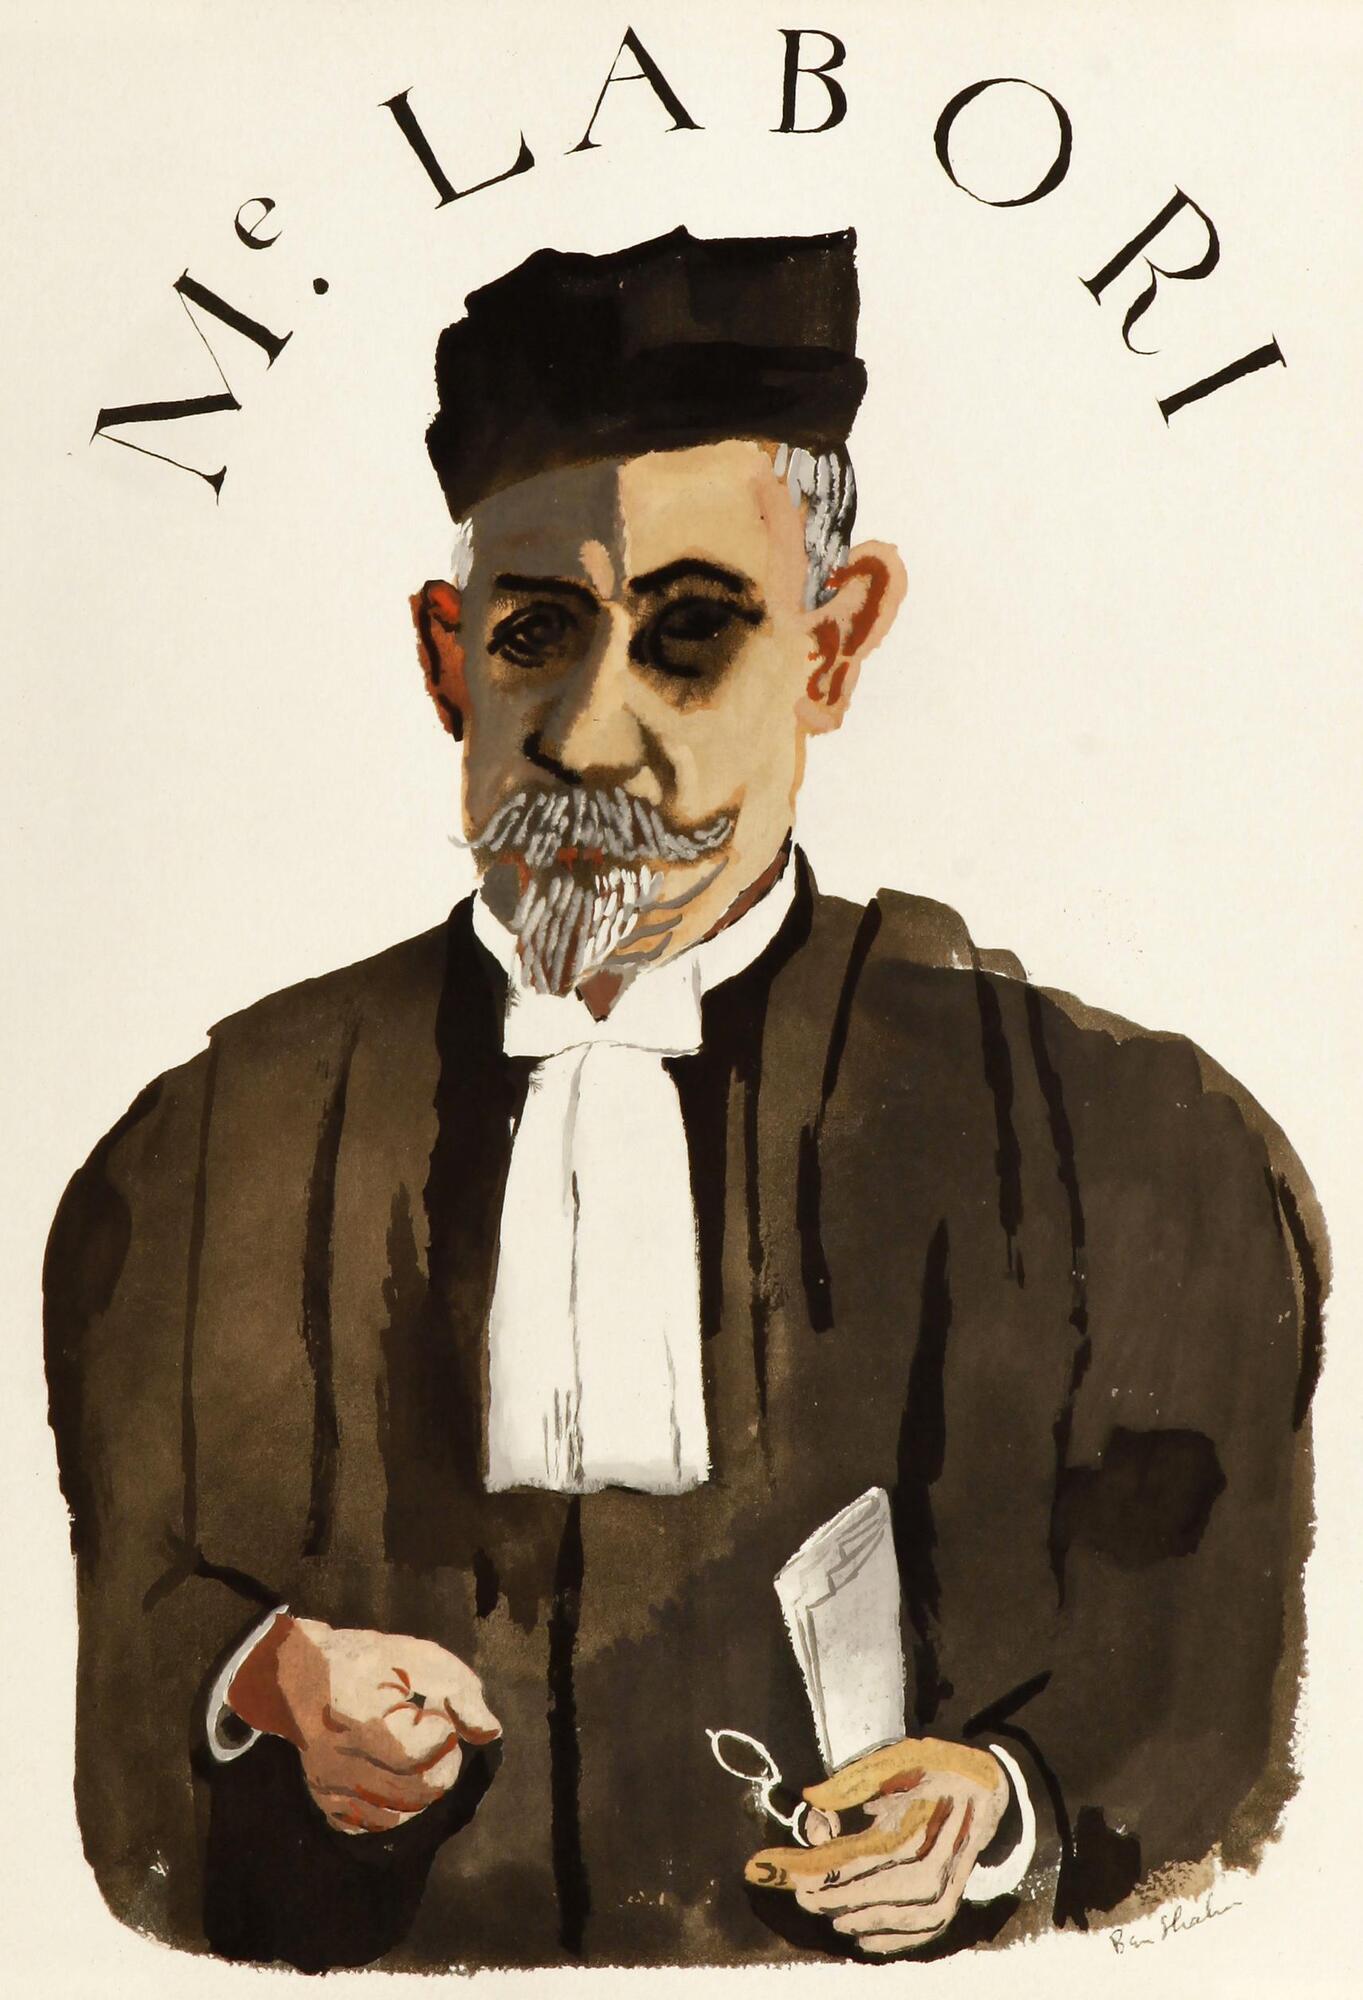 Shown in court attaire, a man stands with arms bent at his waist, and left hand holding both a rolled up document and a small pair of spectacles.  It reads above the man's head "M. Labori", who was Captain Dreyfus' defense attorney.